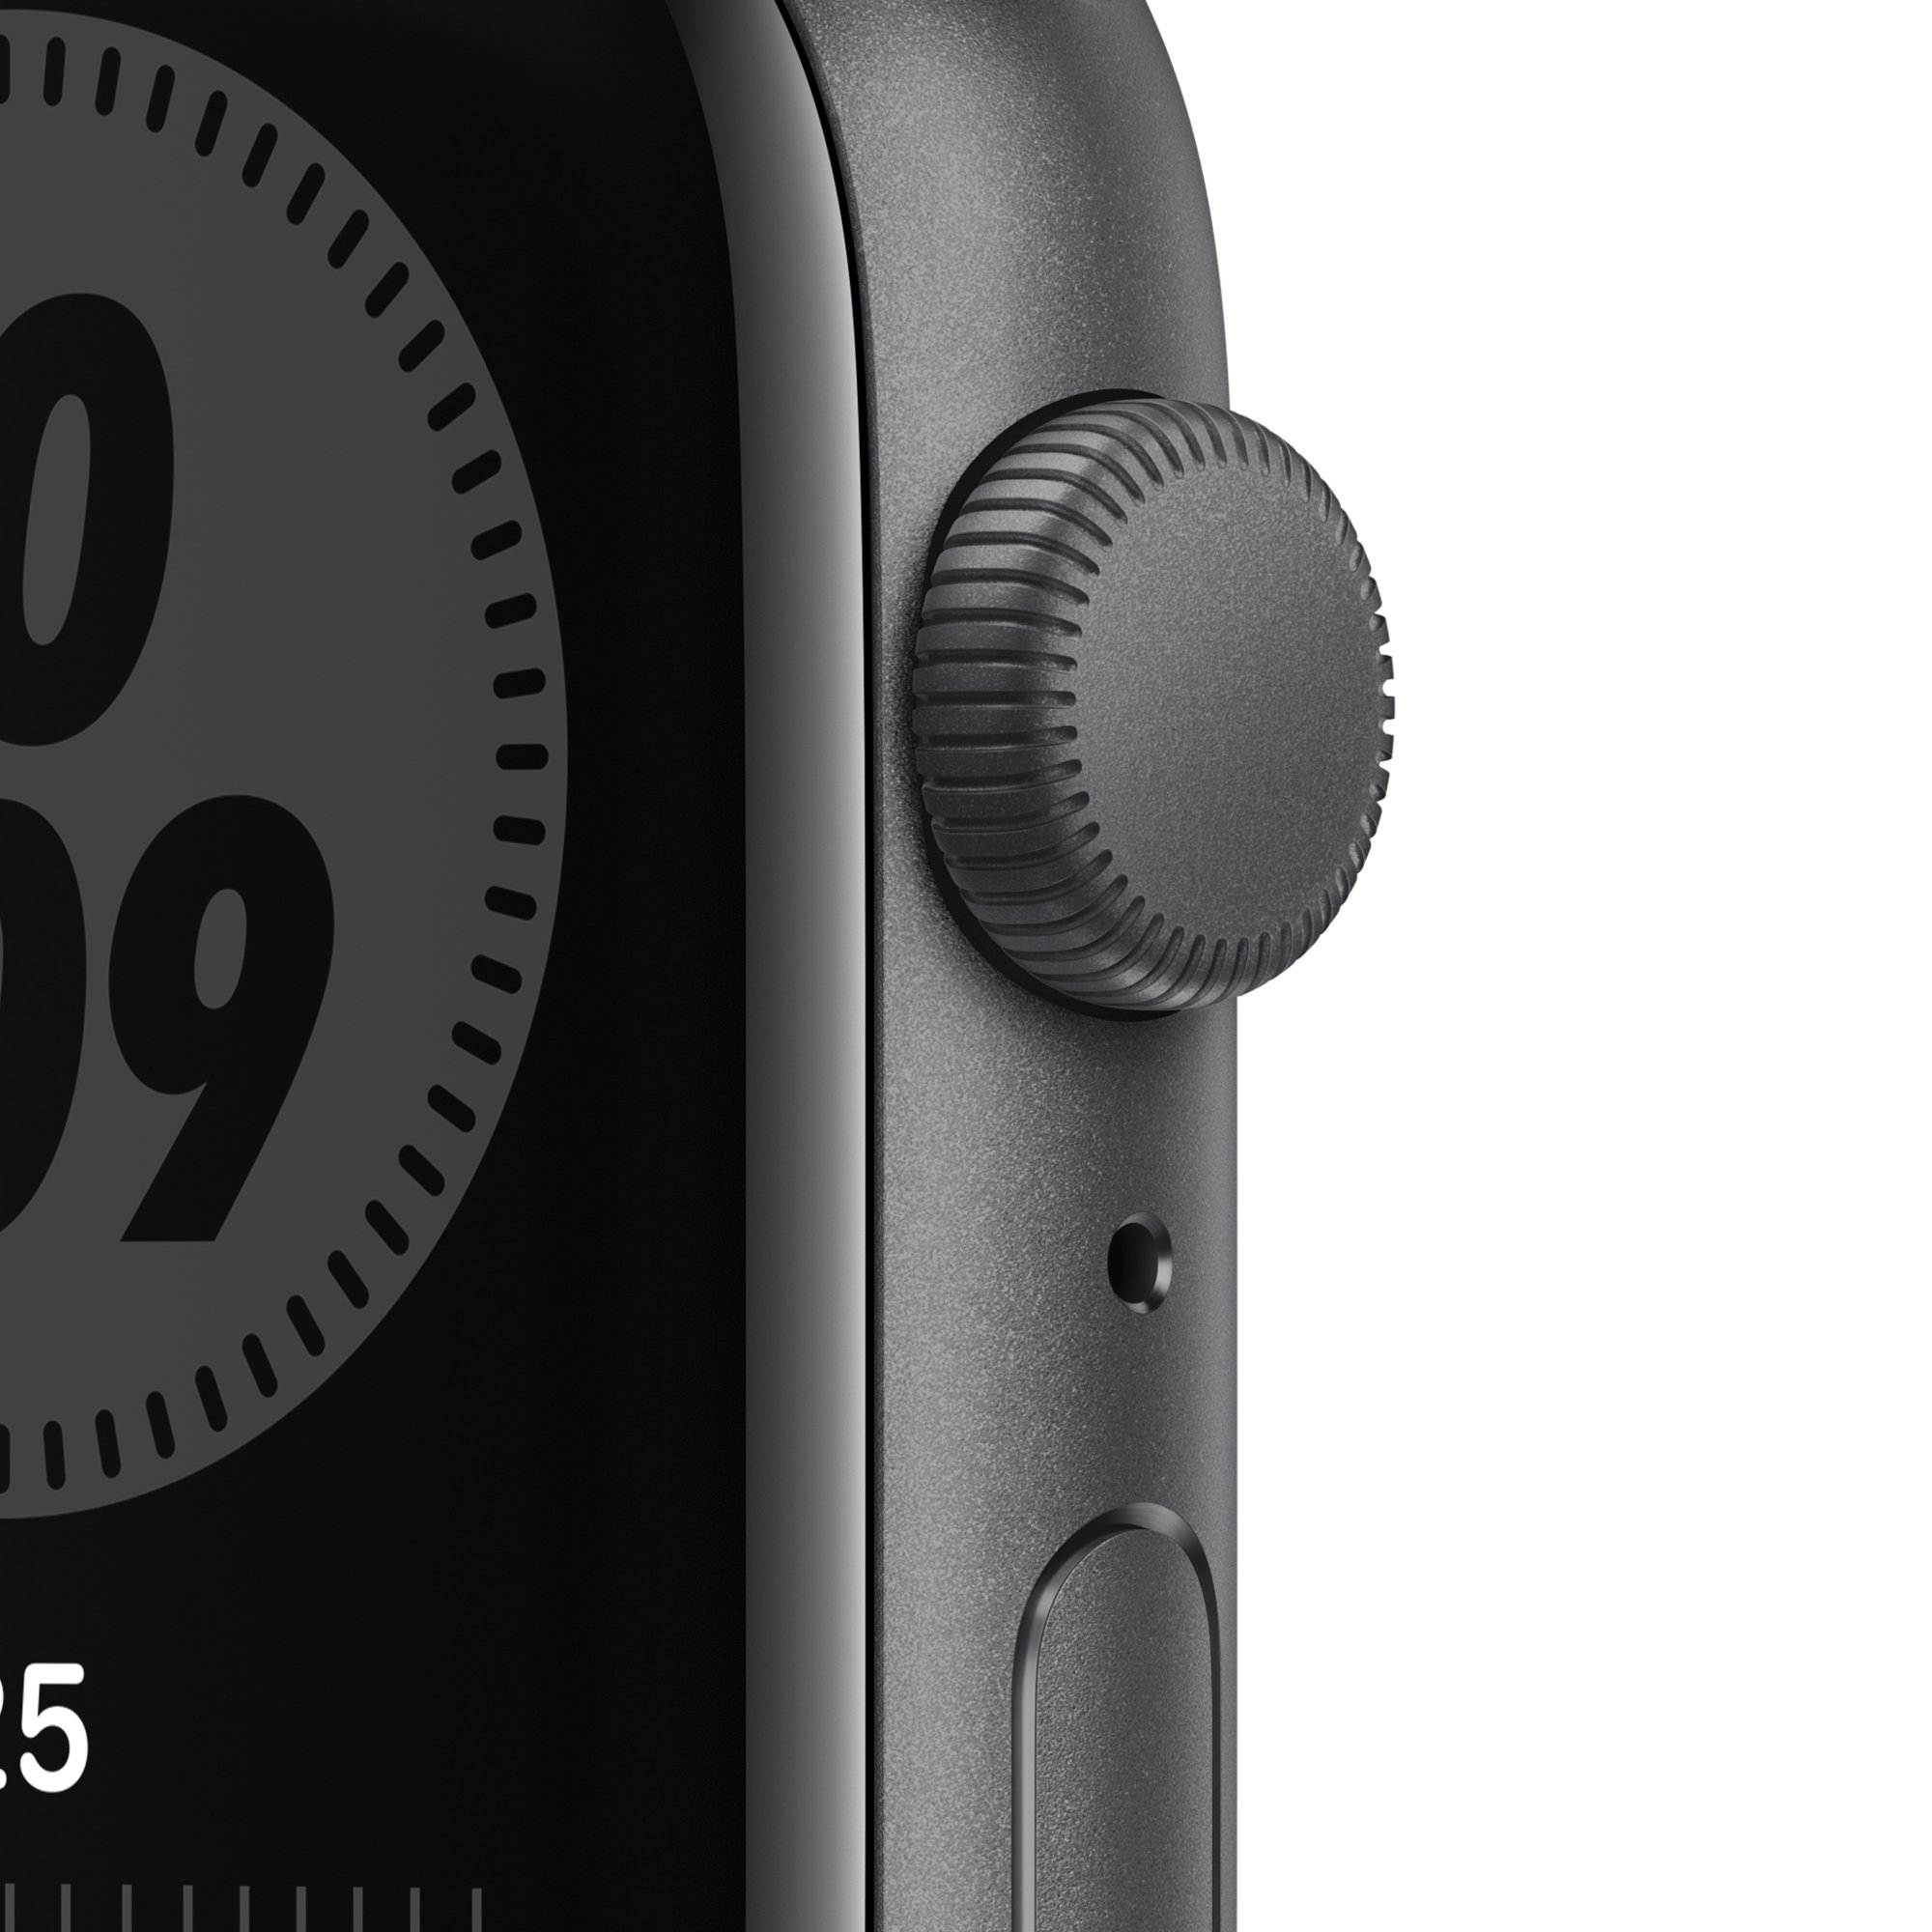 Watch SE 44mm Space Gray Aluminum Case with Anthracite/ Black Nike Sport Band MYYK2LL/A - image 2 of 3